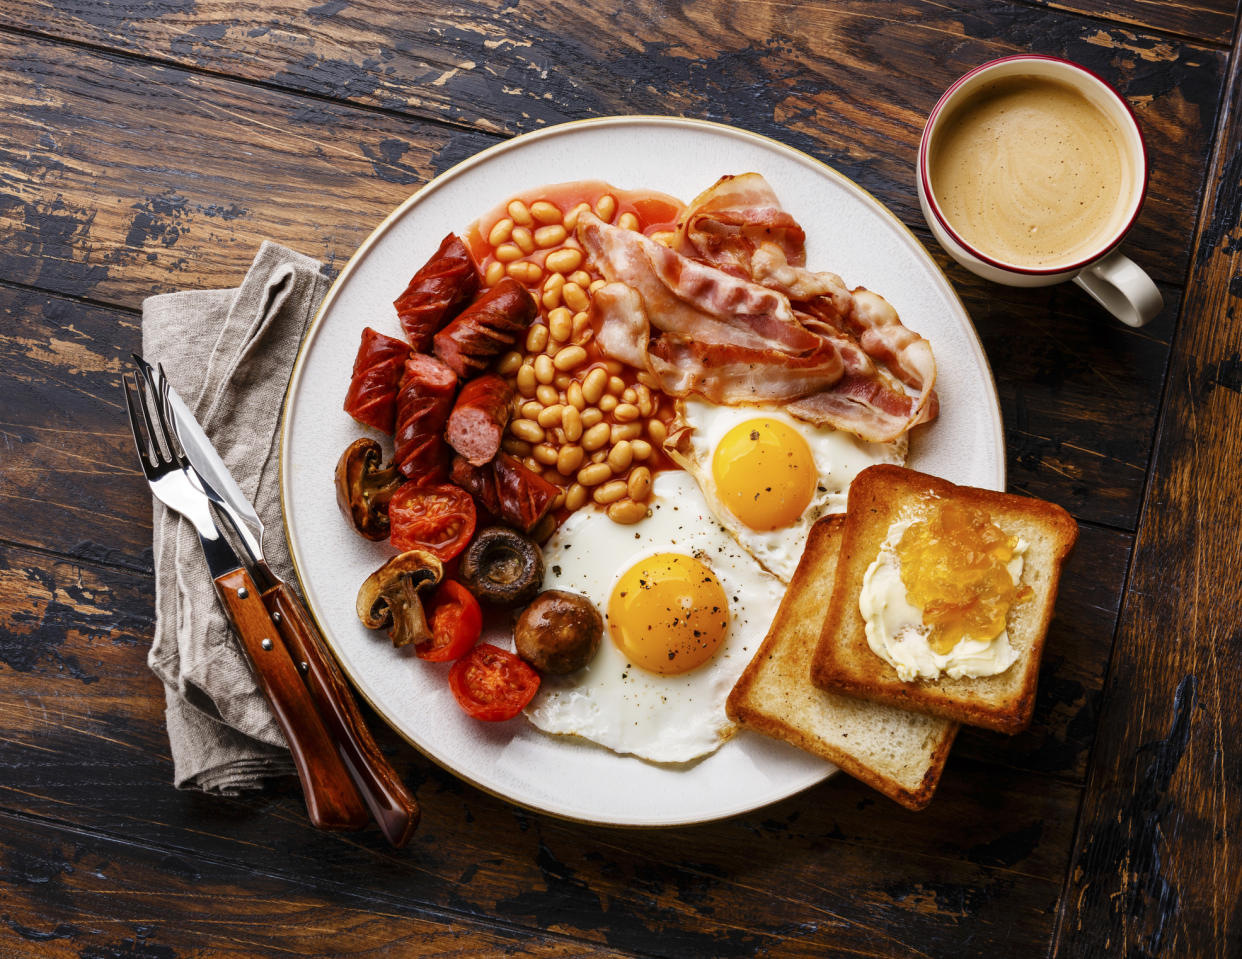 Full English breakfast. (Getty Images)